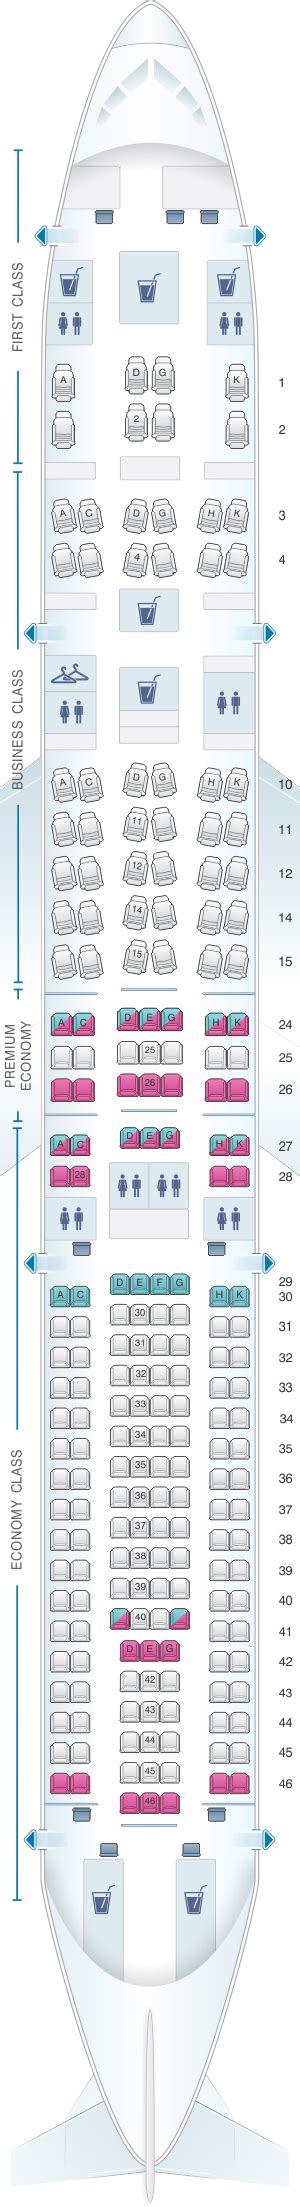 Lufthansa Seat Map Airbus A330 300 Two Birds Home